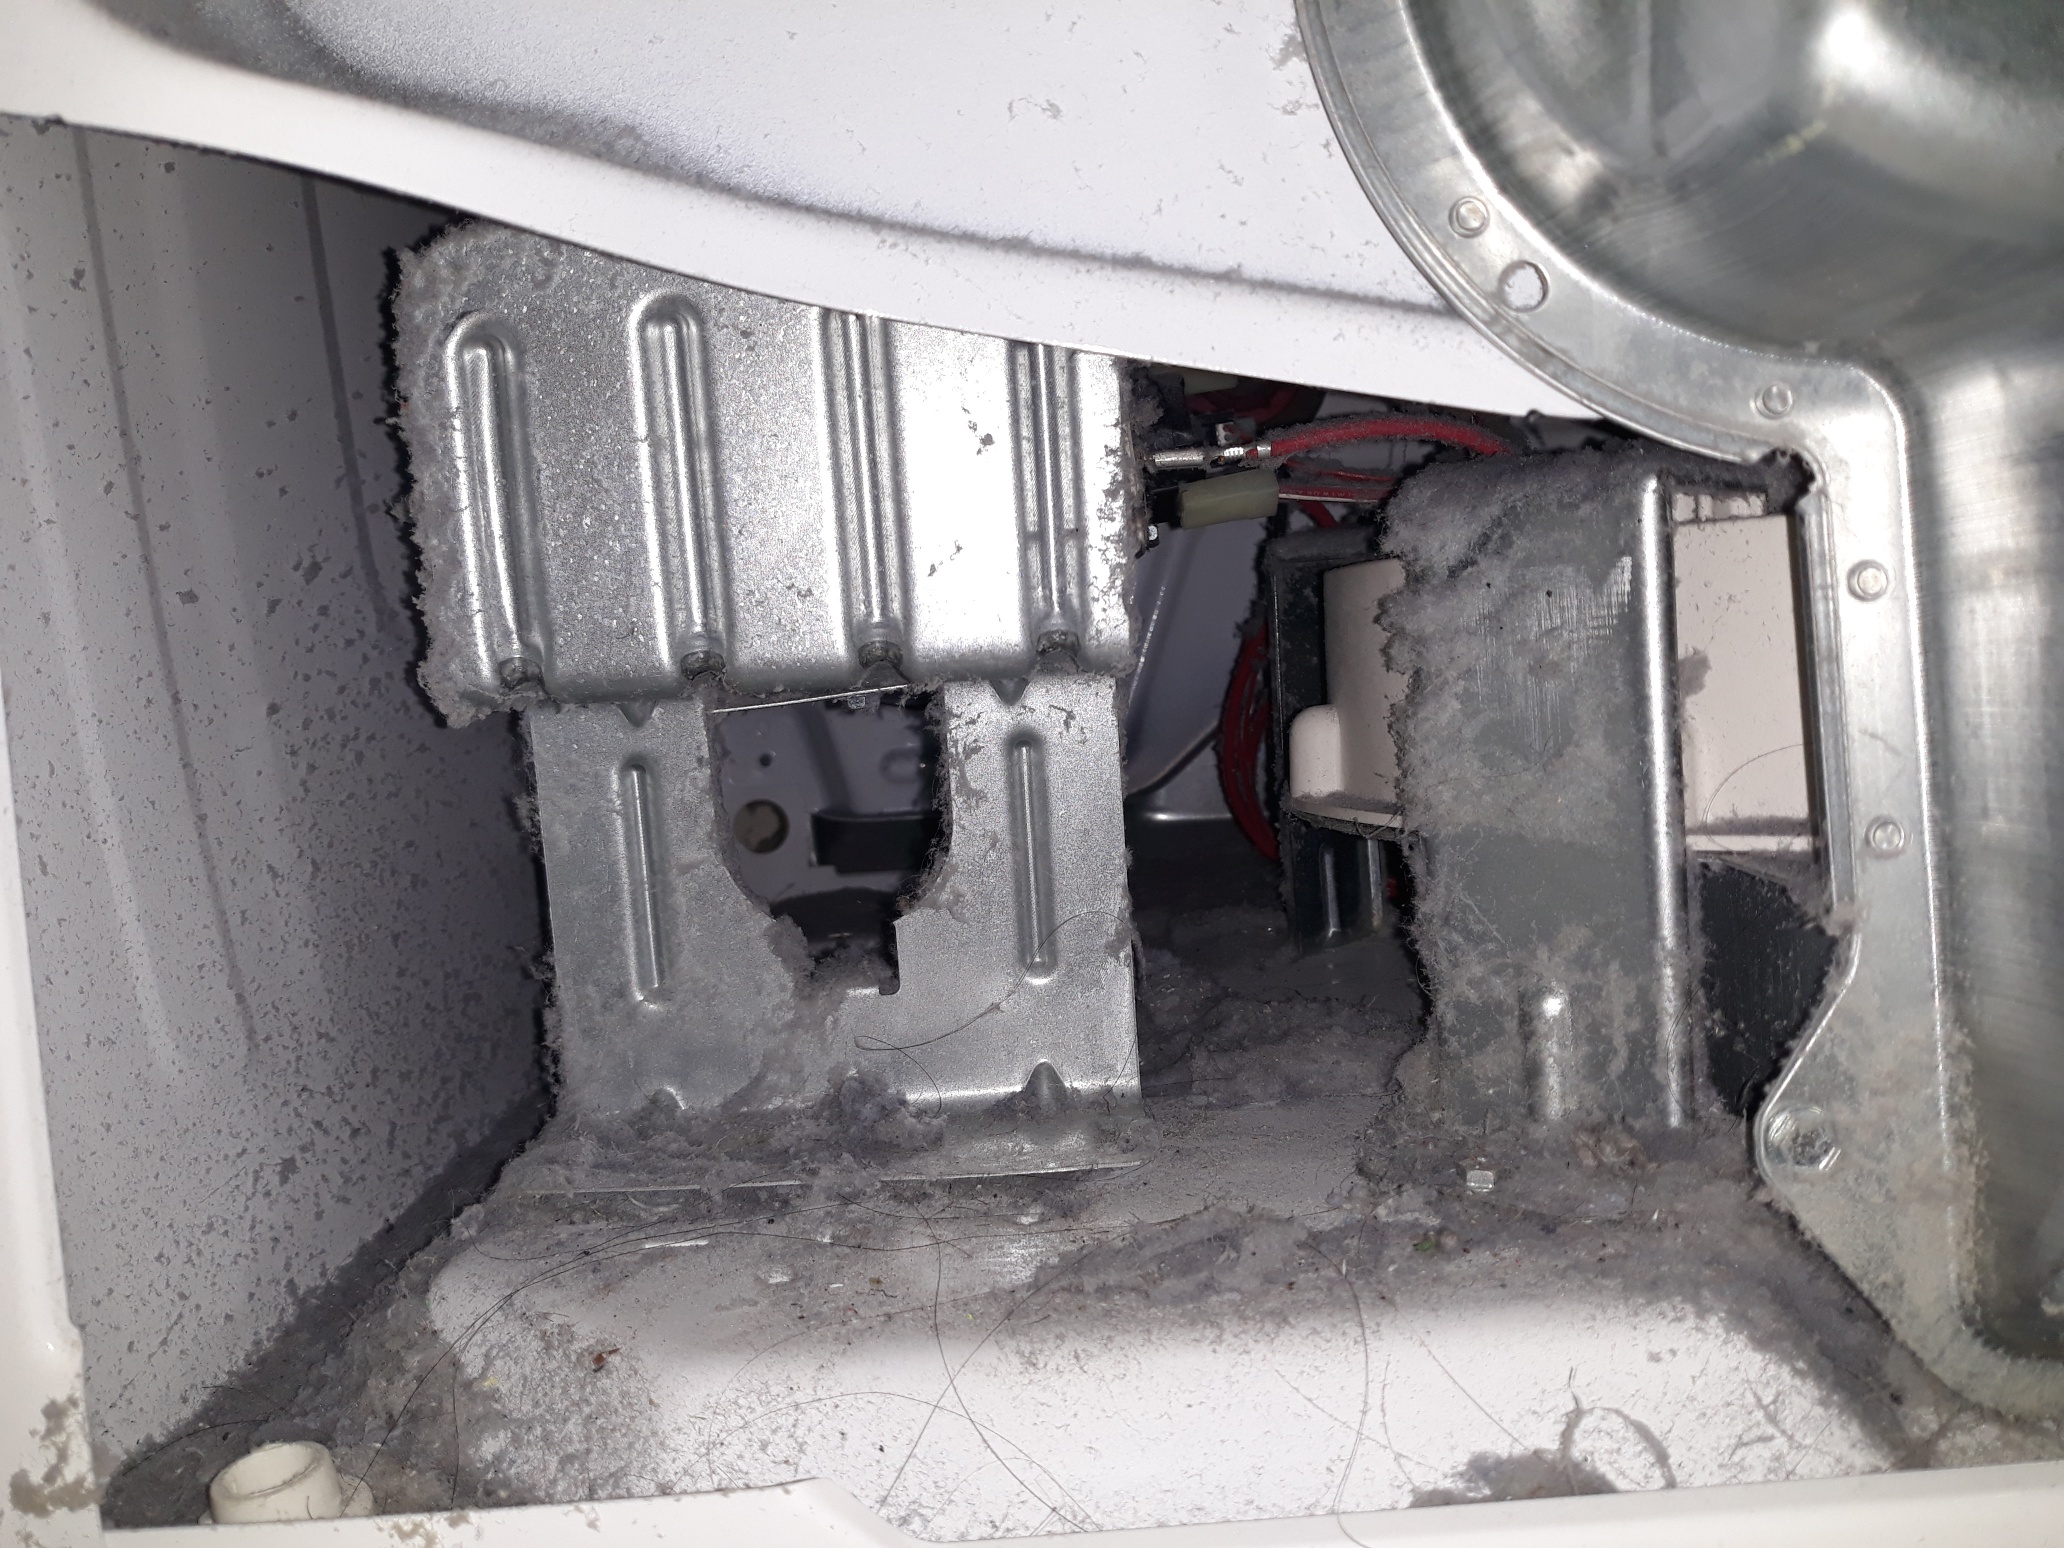 appliance repair dryer repair repair require replacement of the failed heating element assembly and internal lint removal stanton school rd weirsdale fl 32195